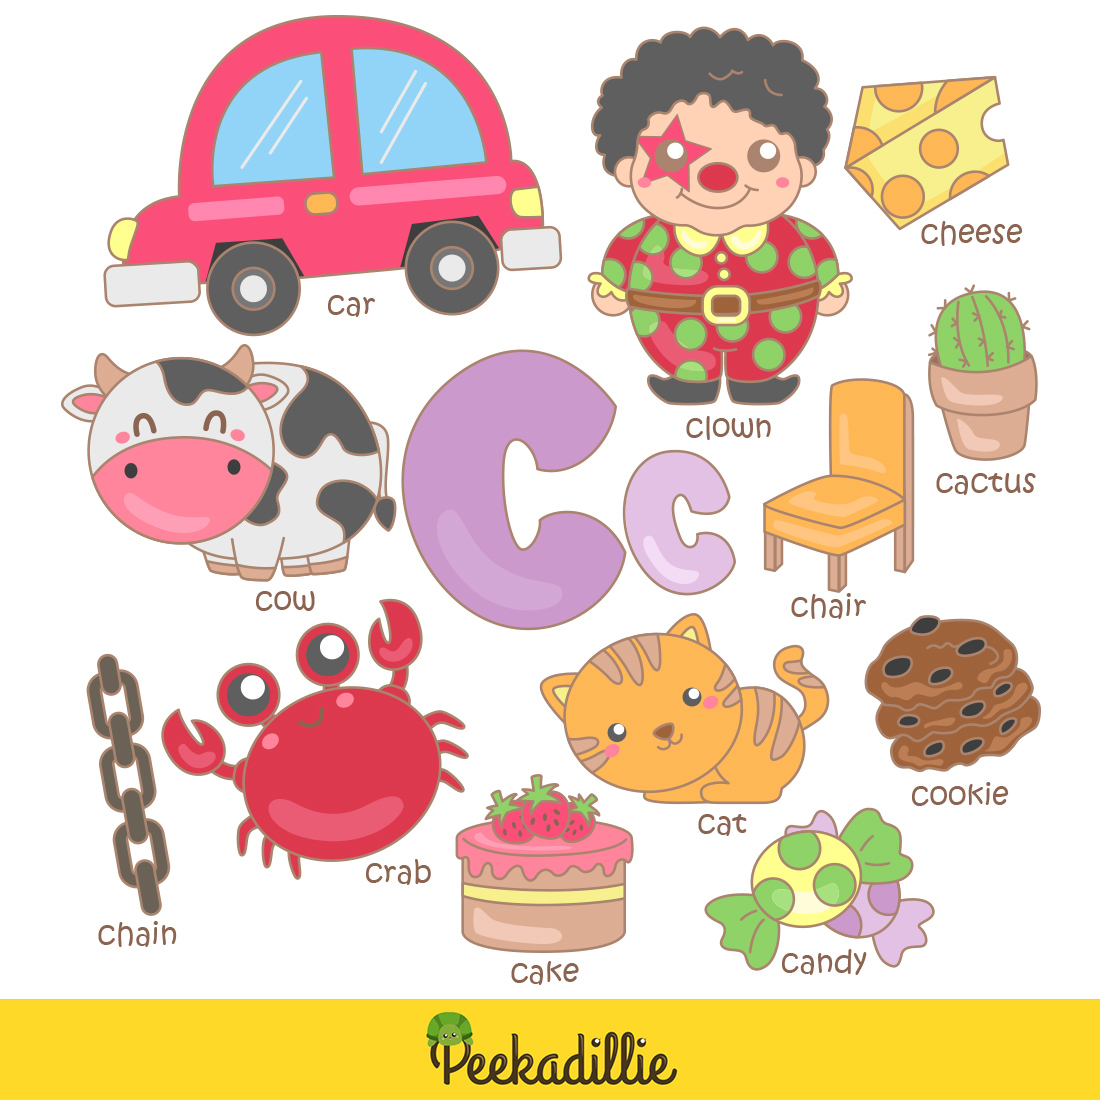 C For Vocabulary School Letter Reading Writing Font Study Learning Student Toodler Kids Car Crab Cake Clown Cookie Cow Cactus Cheese Candy Chain Chair Cat Cartoon Illustration Vector Clipart preview image.